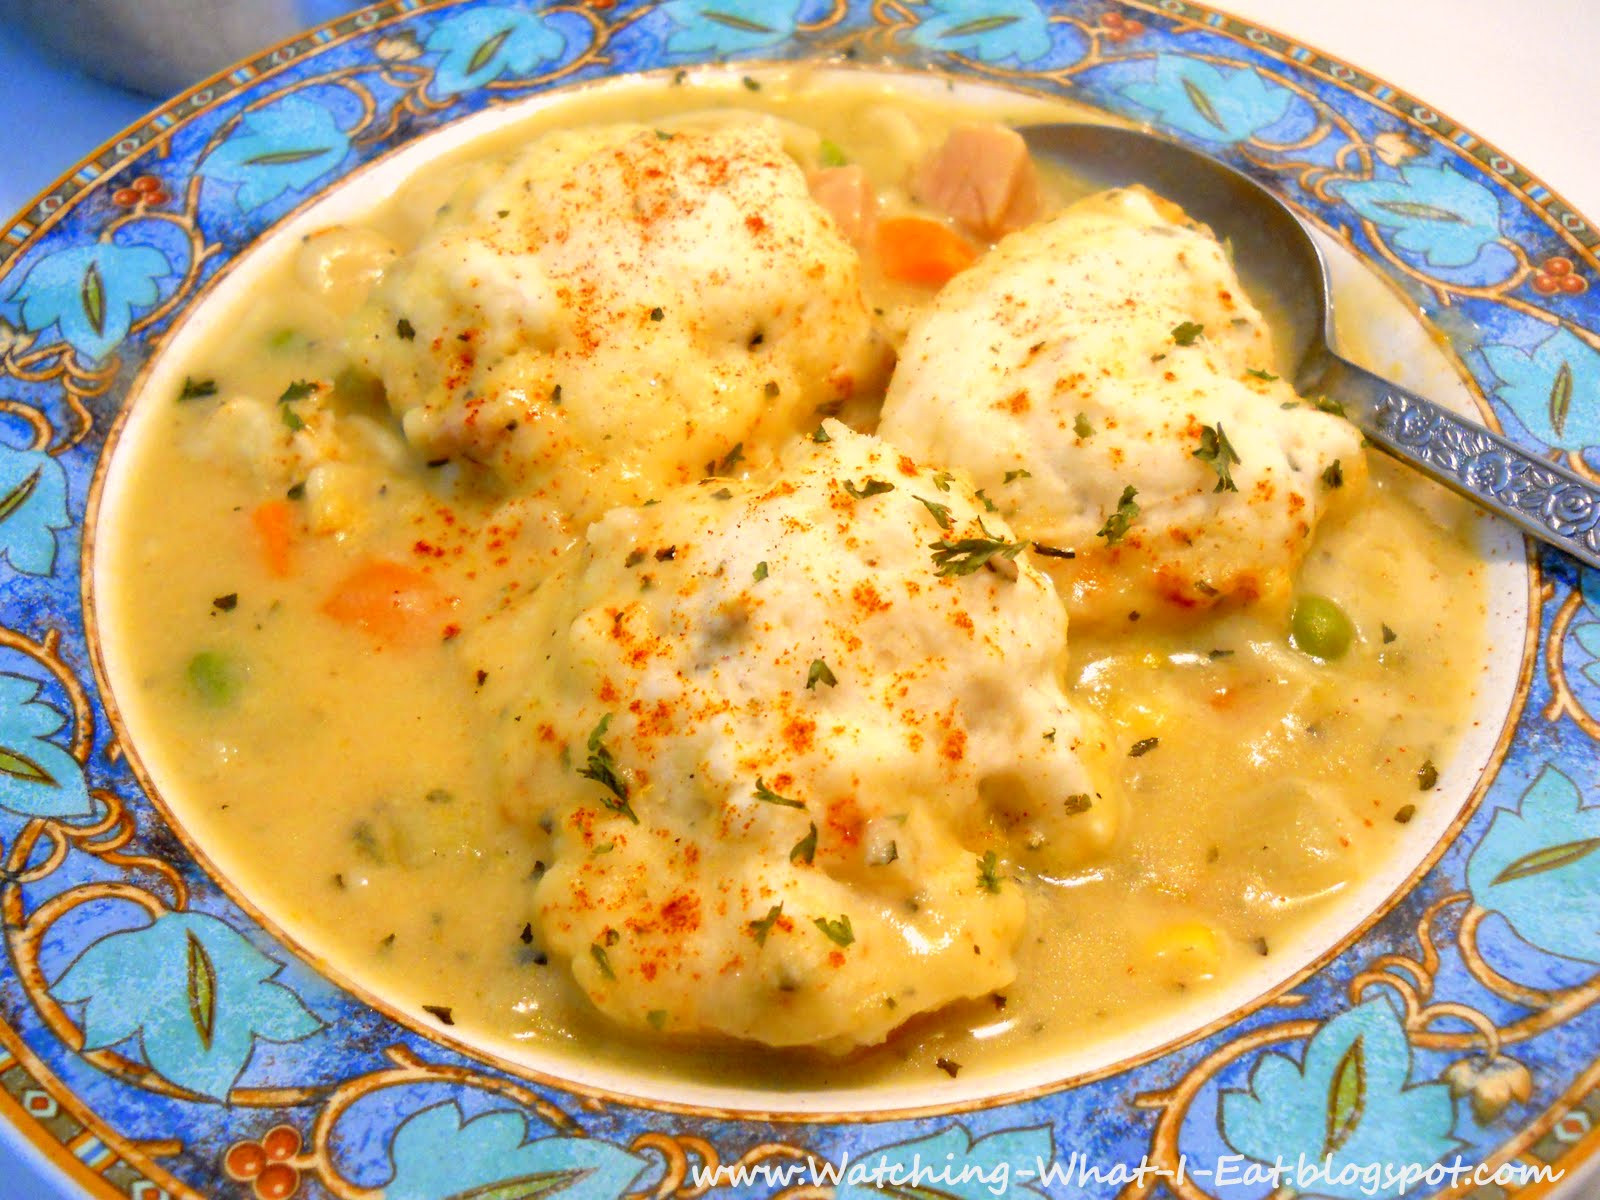 Bisquick Chicken And Dumplings Recipe
 Watching What I Eat Easy Chicken and Dumplings